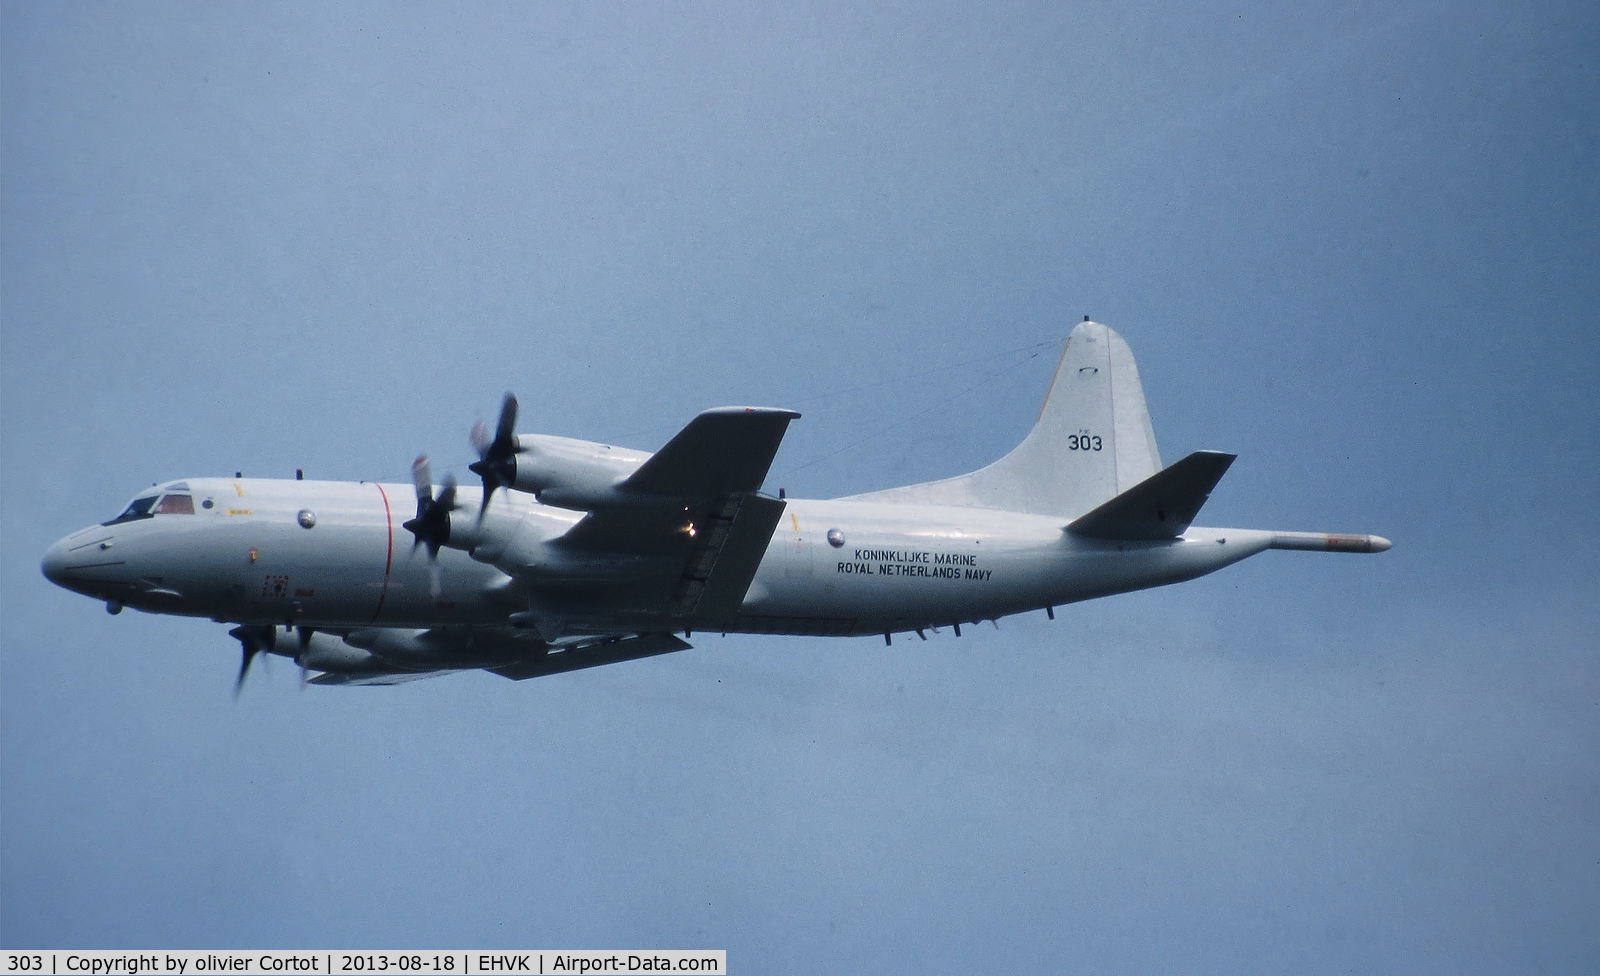 303, Lockheed P-3C Orion C/N 285E-5745, last paint scheme before going to the German Navy. Scan of a slide, sorry for the poor quality...